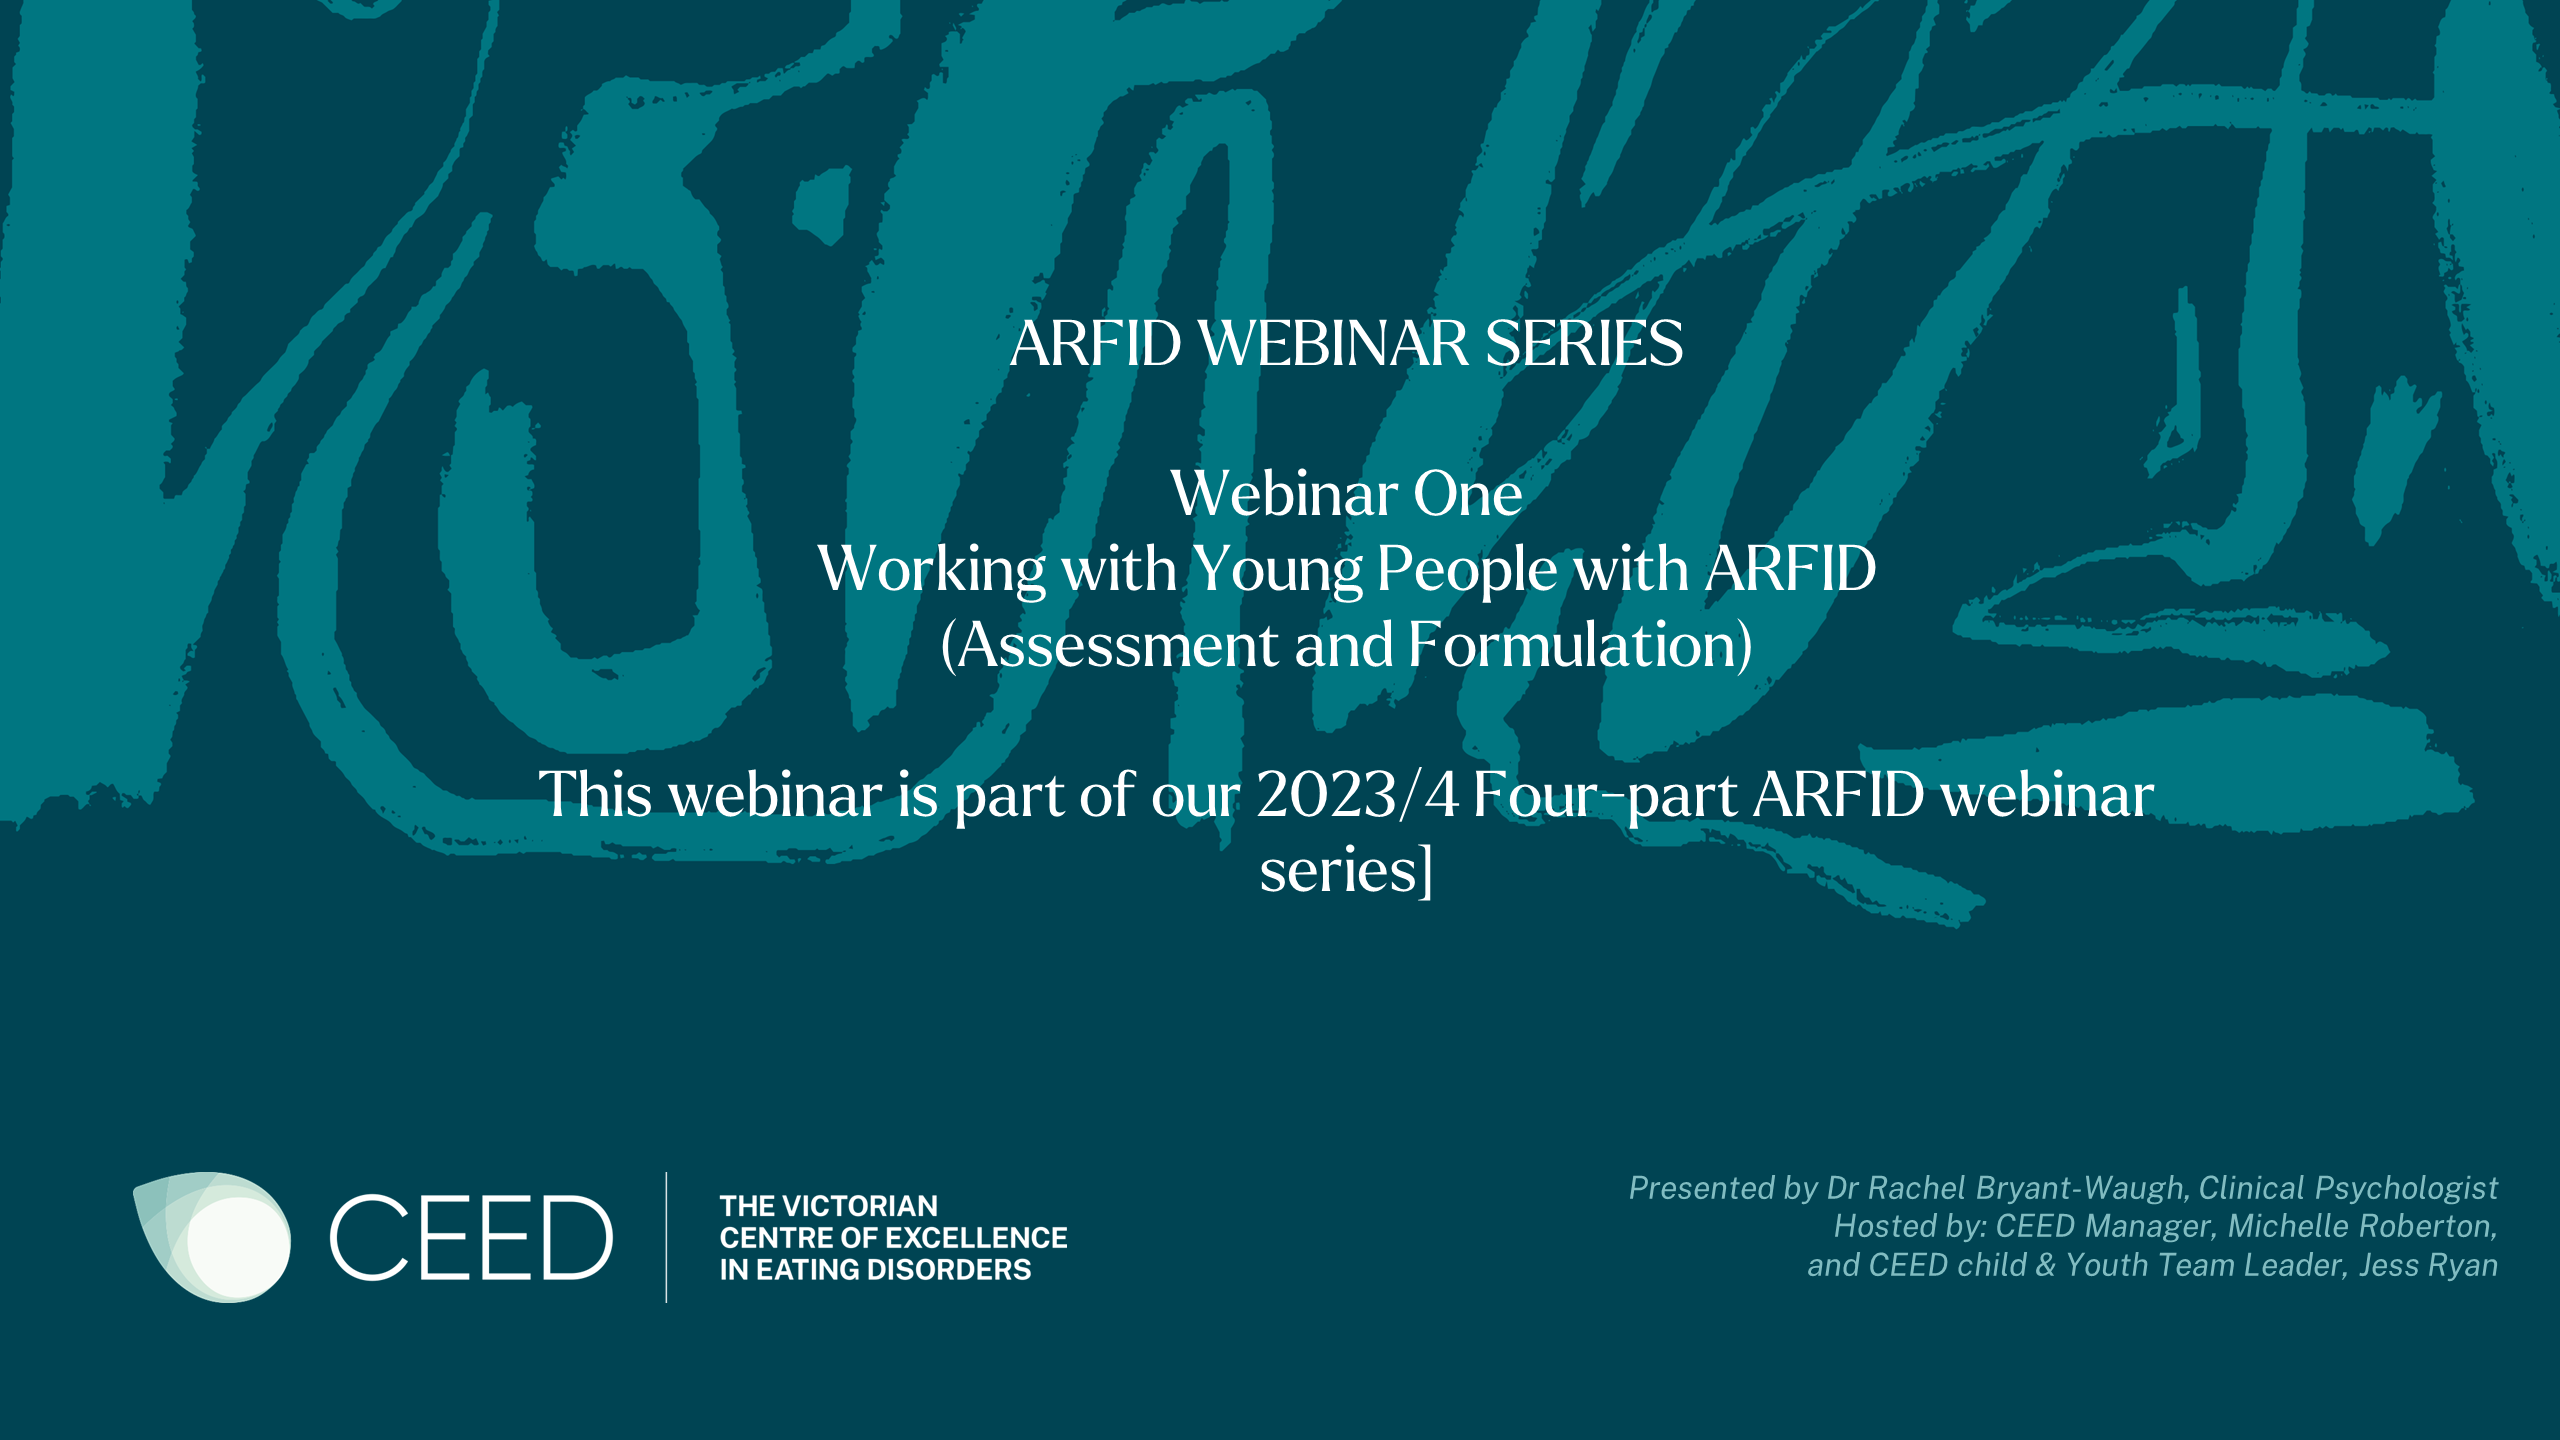 ARFID Webinar series 2023/24 - Webinar 1. Working with Young People with ARFID: Assessment and Formulation. 
Presented by Dr Rachel Bryant-Waugh.